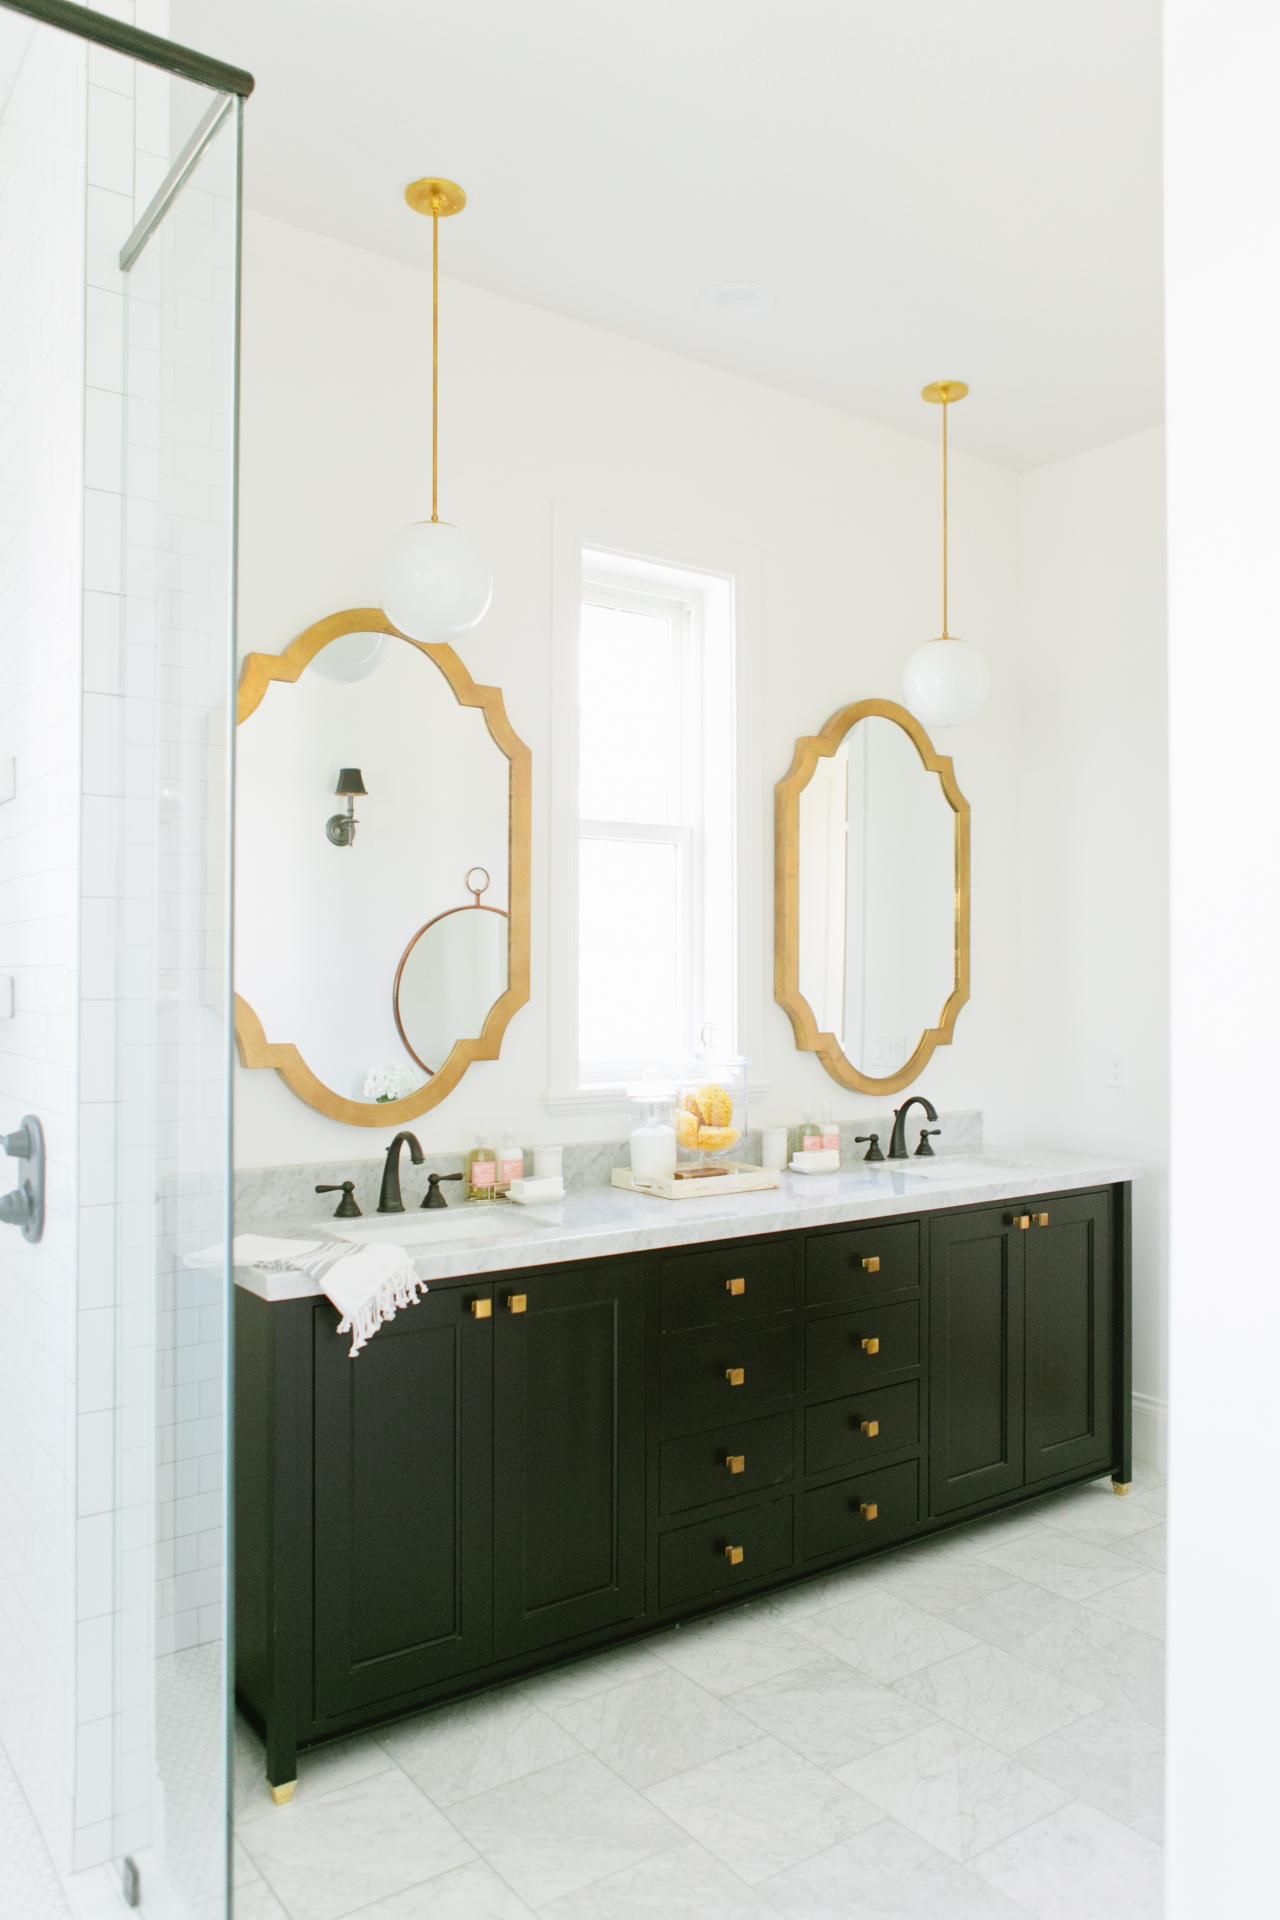 10 Powder Room Mirrors Ideas For Your, Funky Bathroom Mirrors With Lights